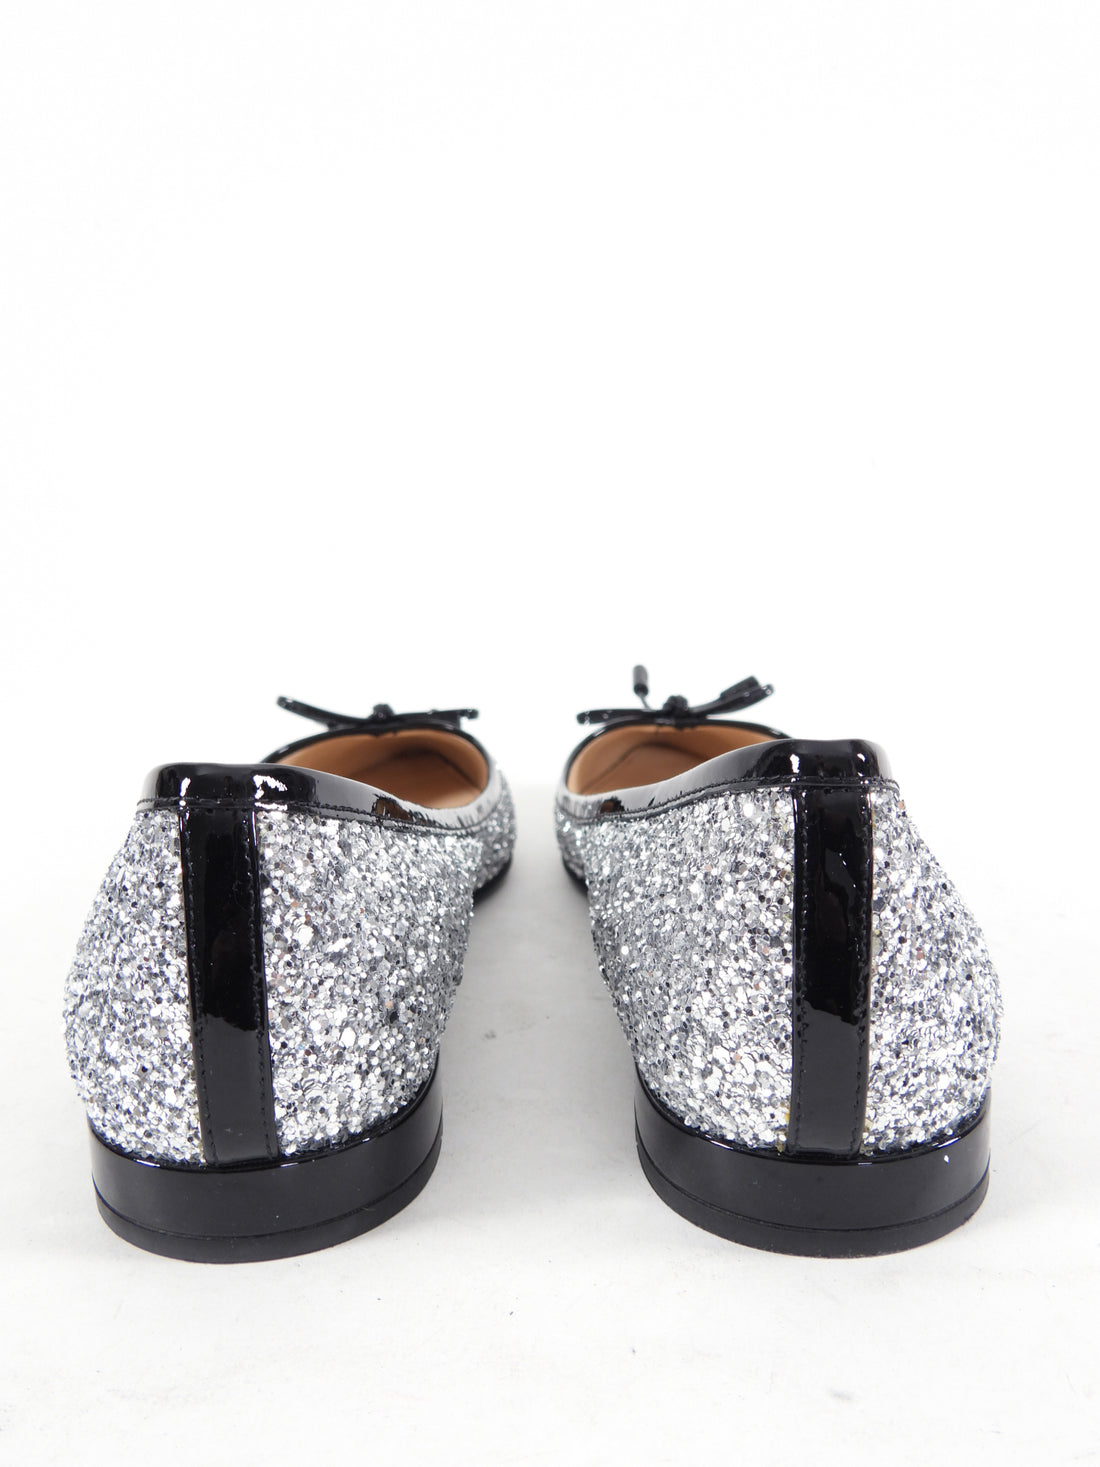 Prada Silver Glitter and Black Patent Pointed Flats - 7.5